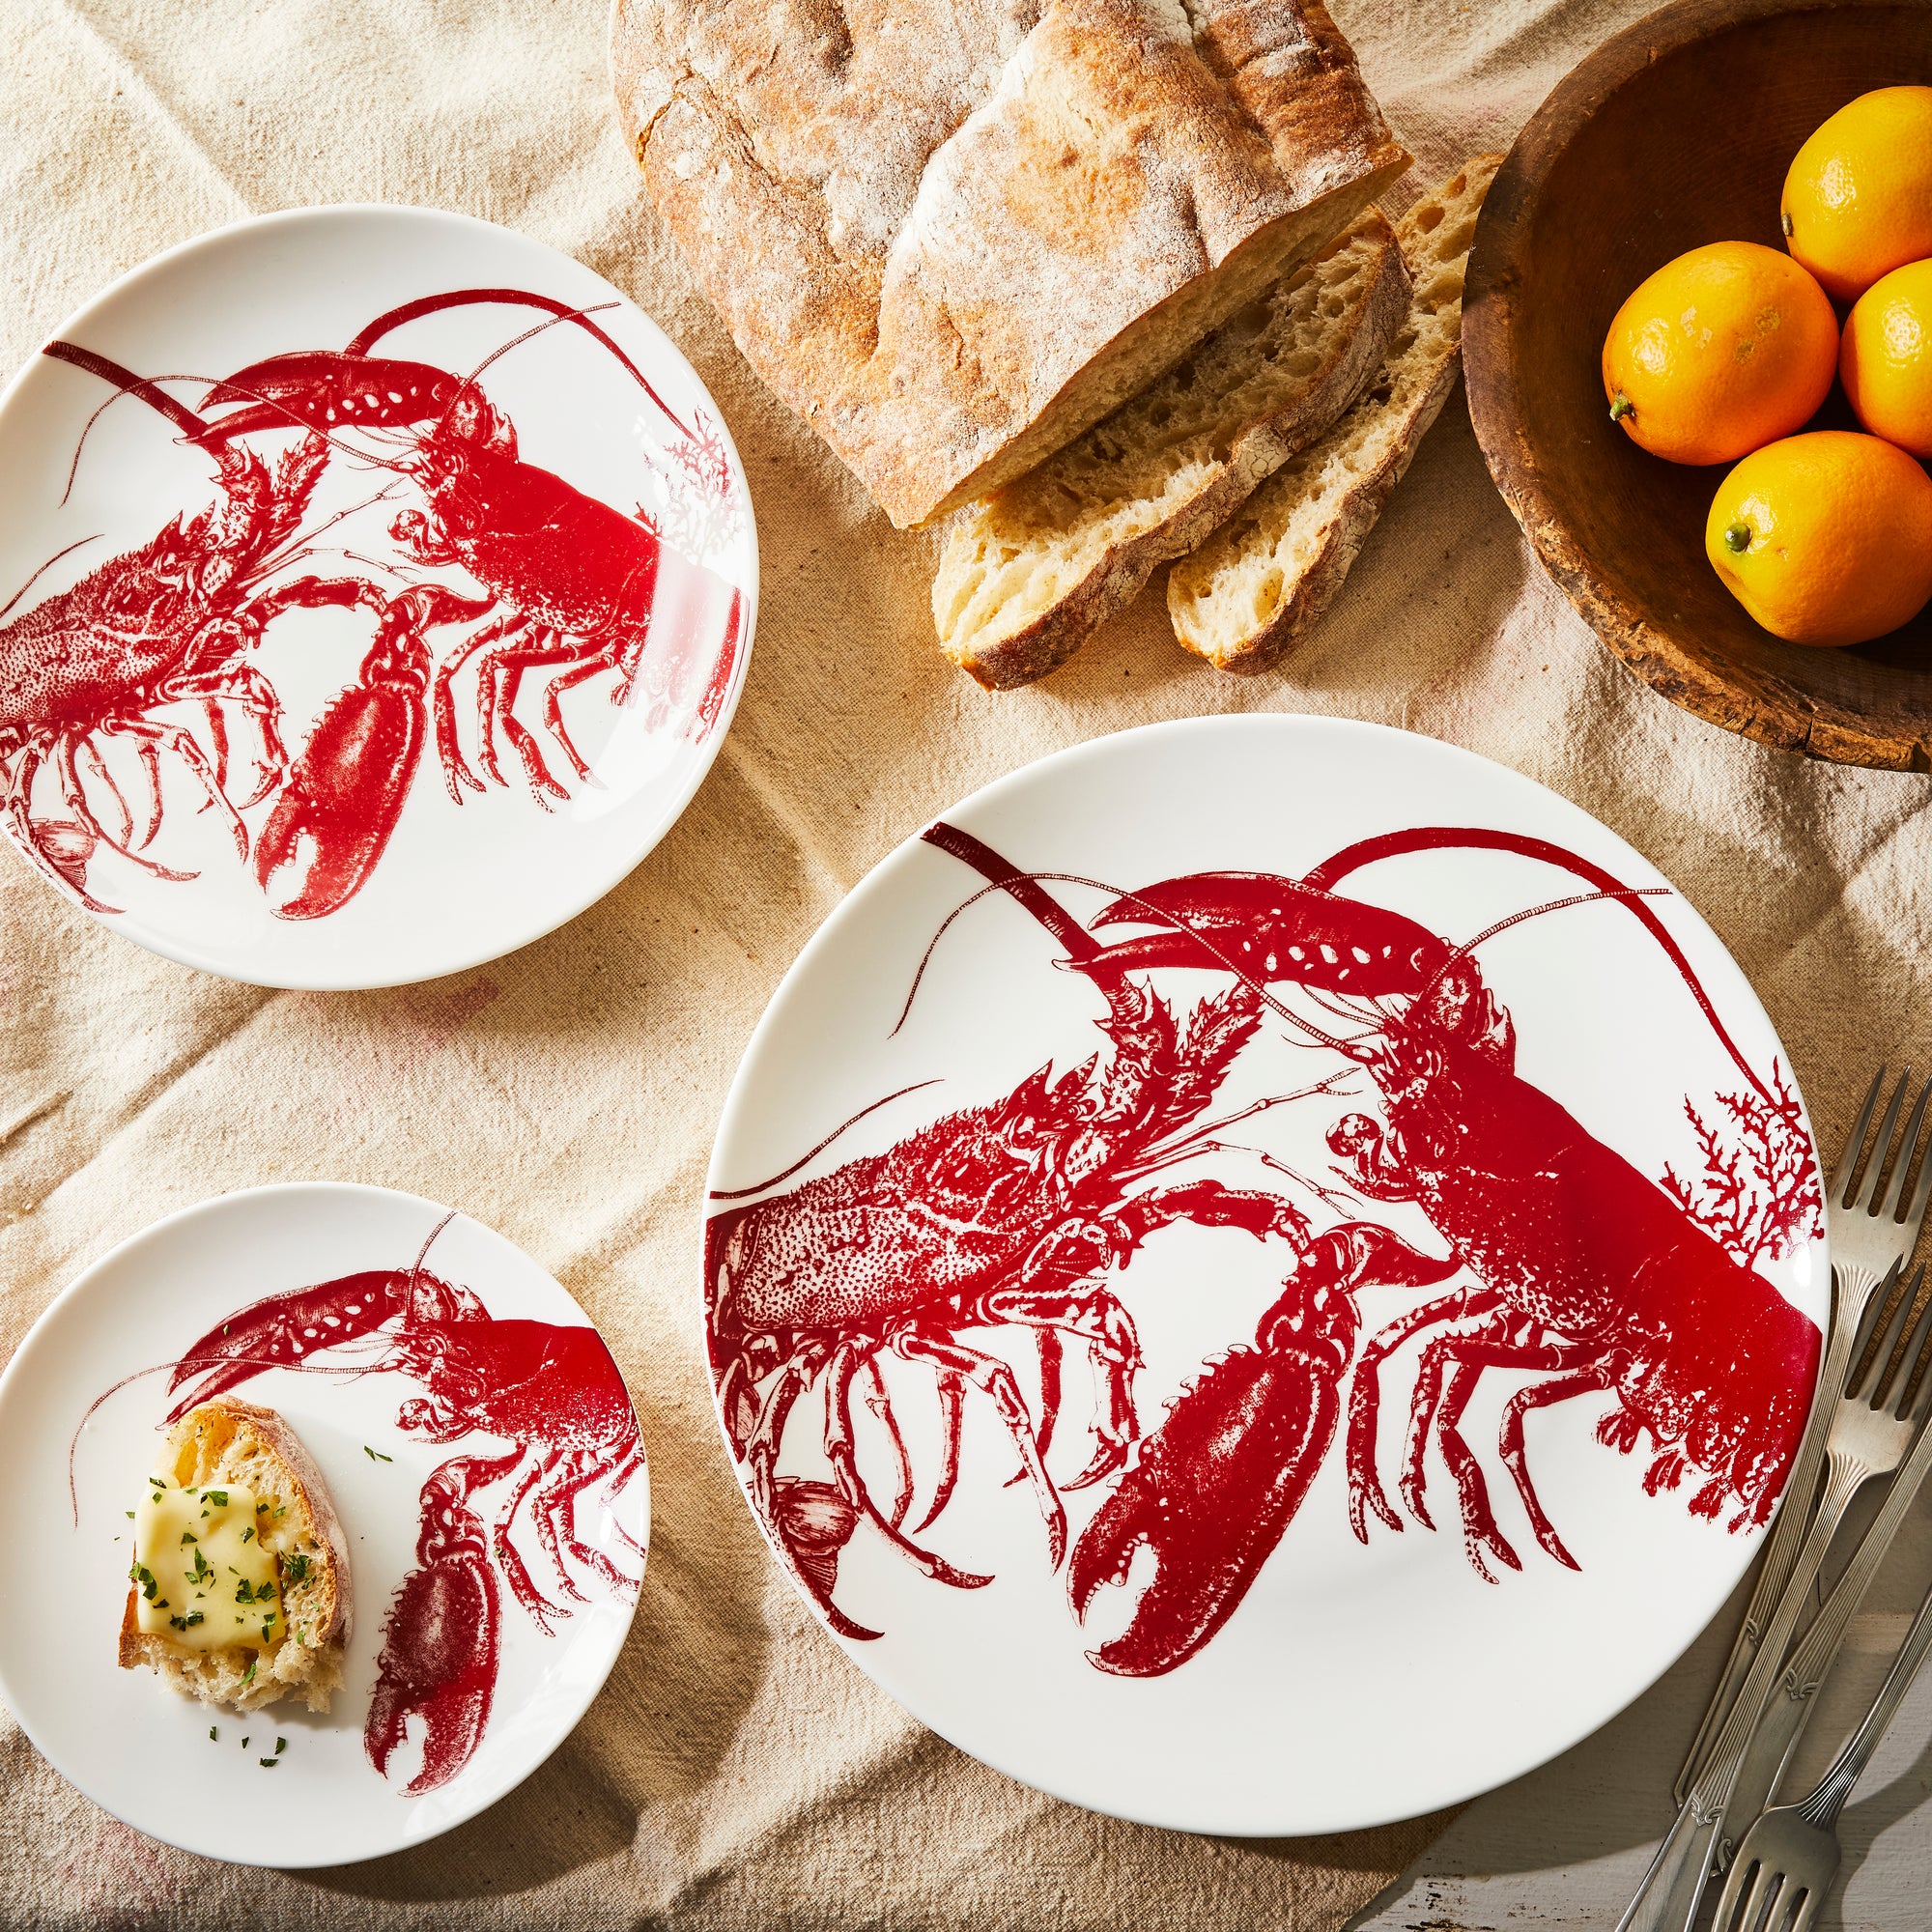 A set of Caskata Beach Wedding Bundle plates featuring red lobster designs, arranged in groups of various sizes.